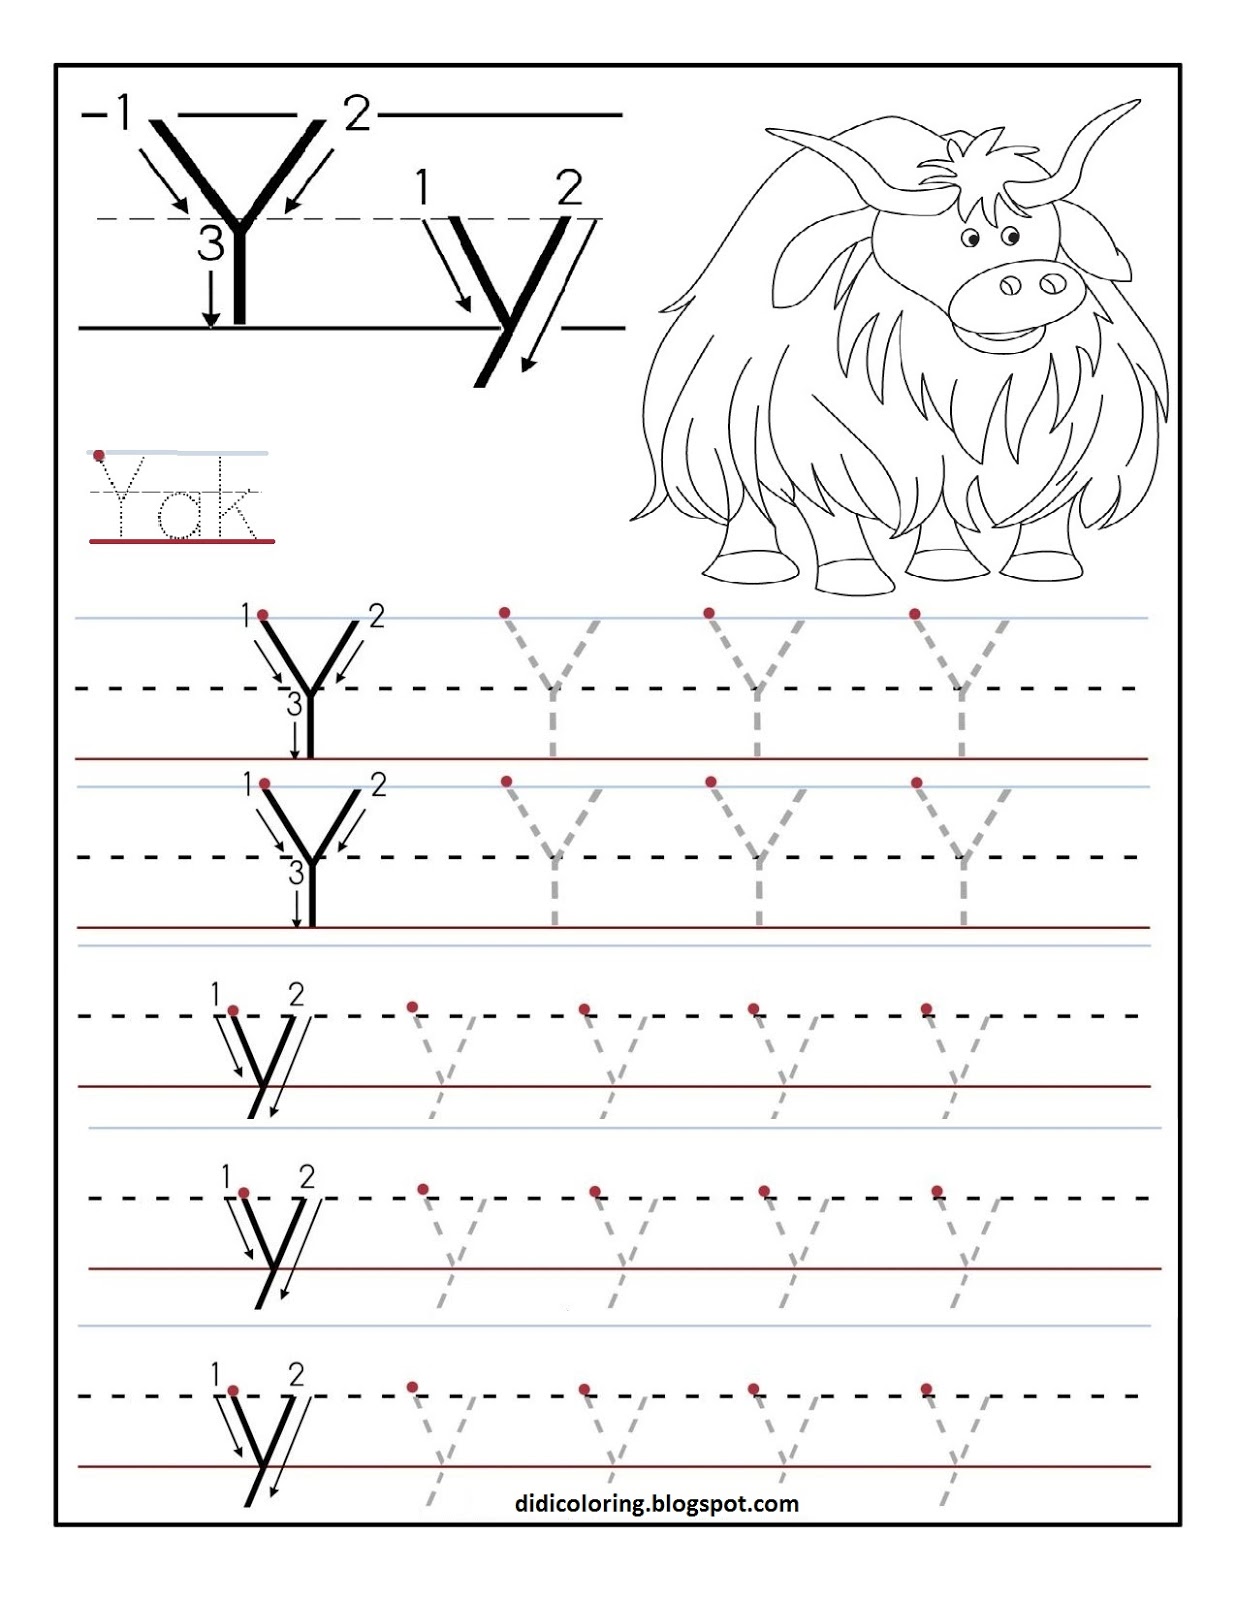 Didi coloring Page: Free printable worksheet letter Y for your